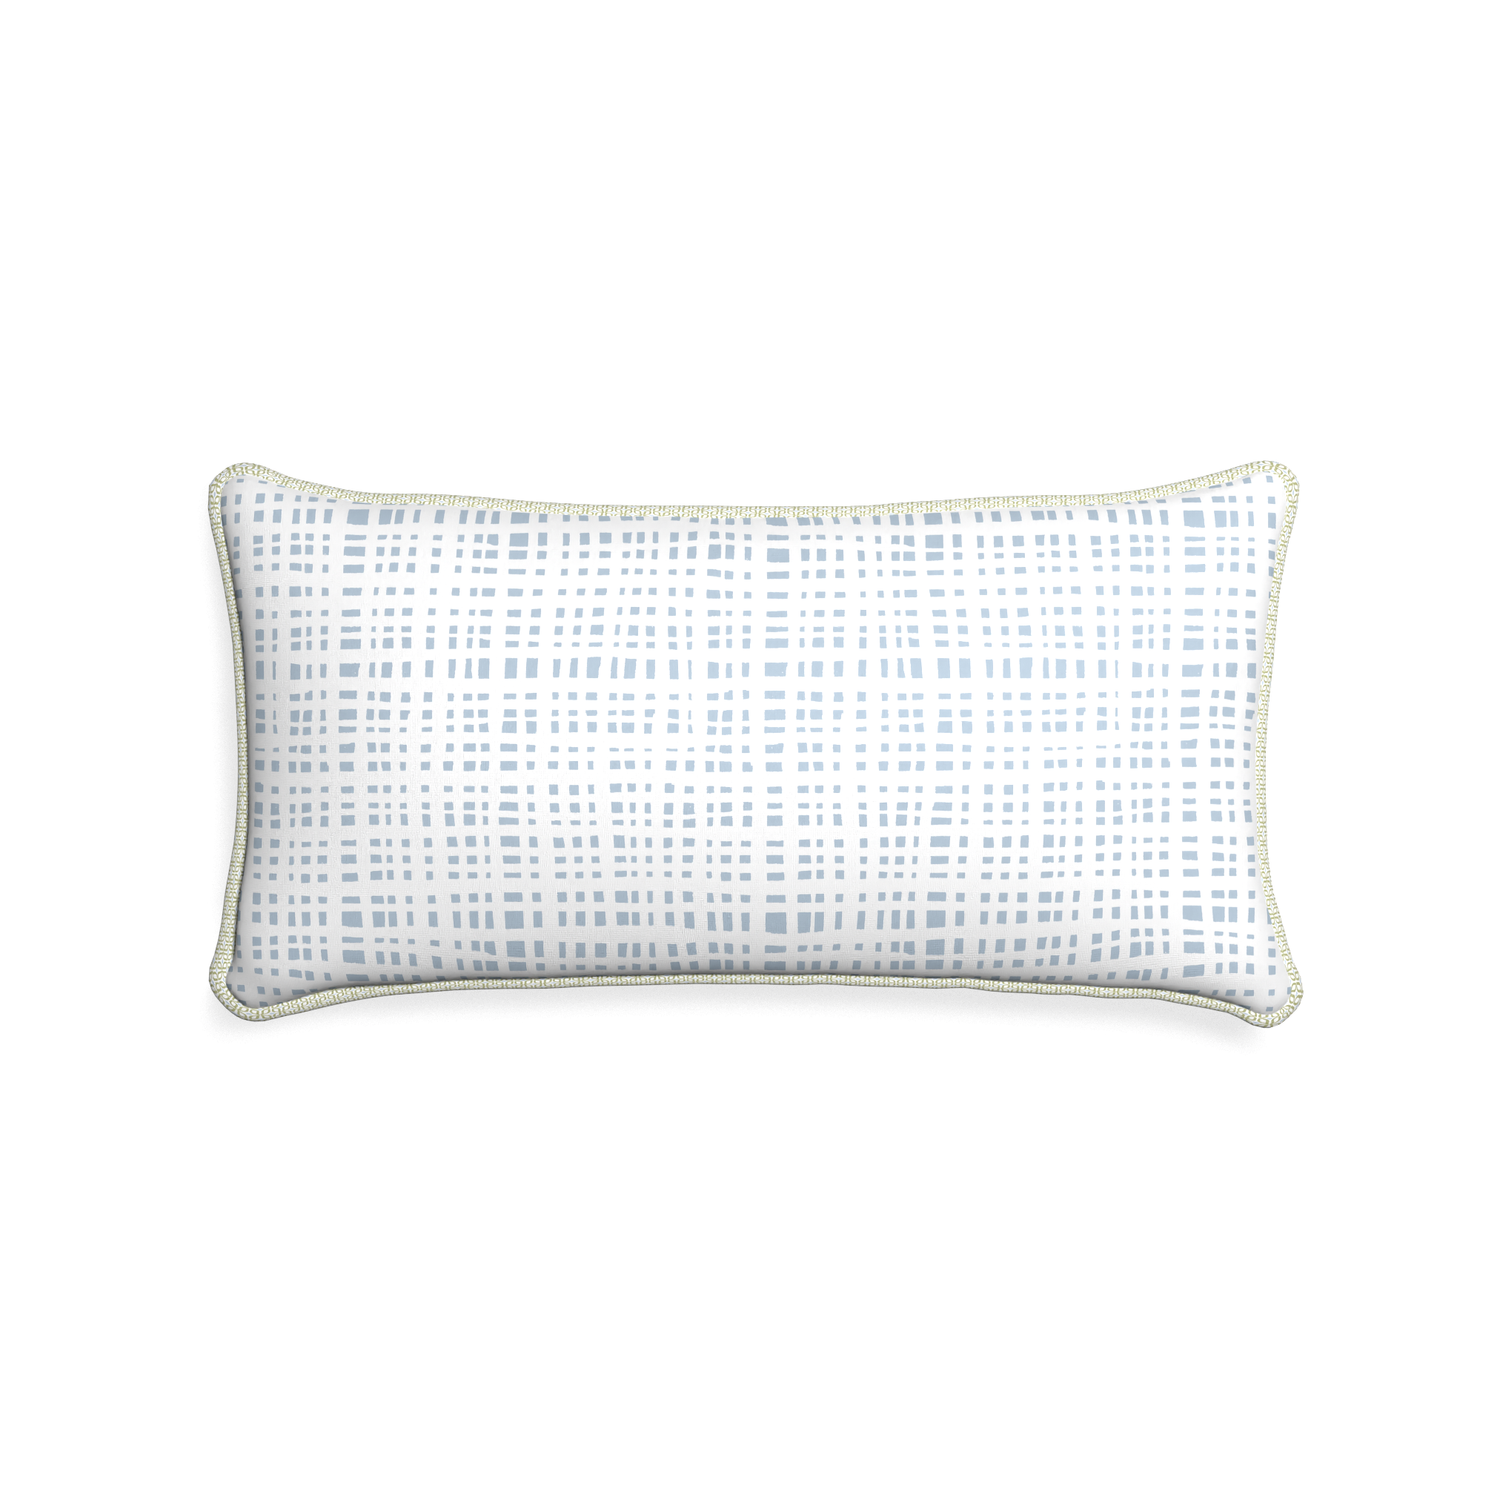 Midi-lumbar ginger custom plaid sky bluepillow with l piping on white background